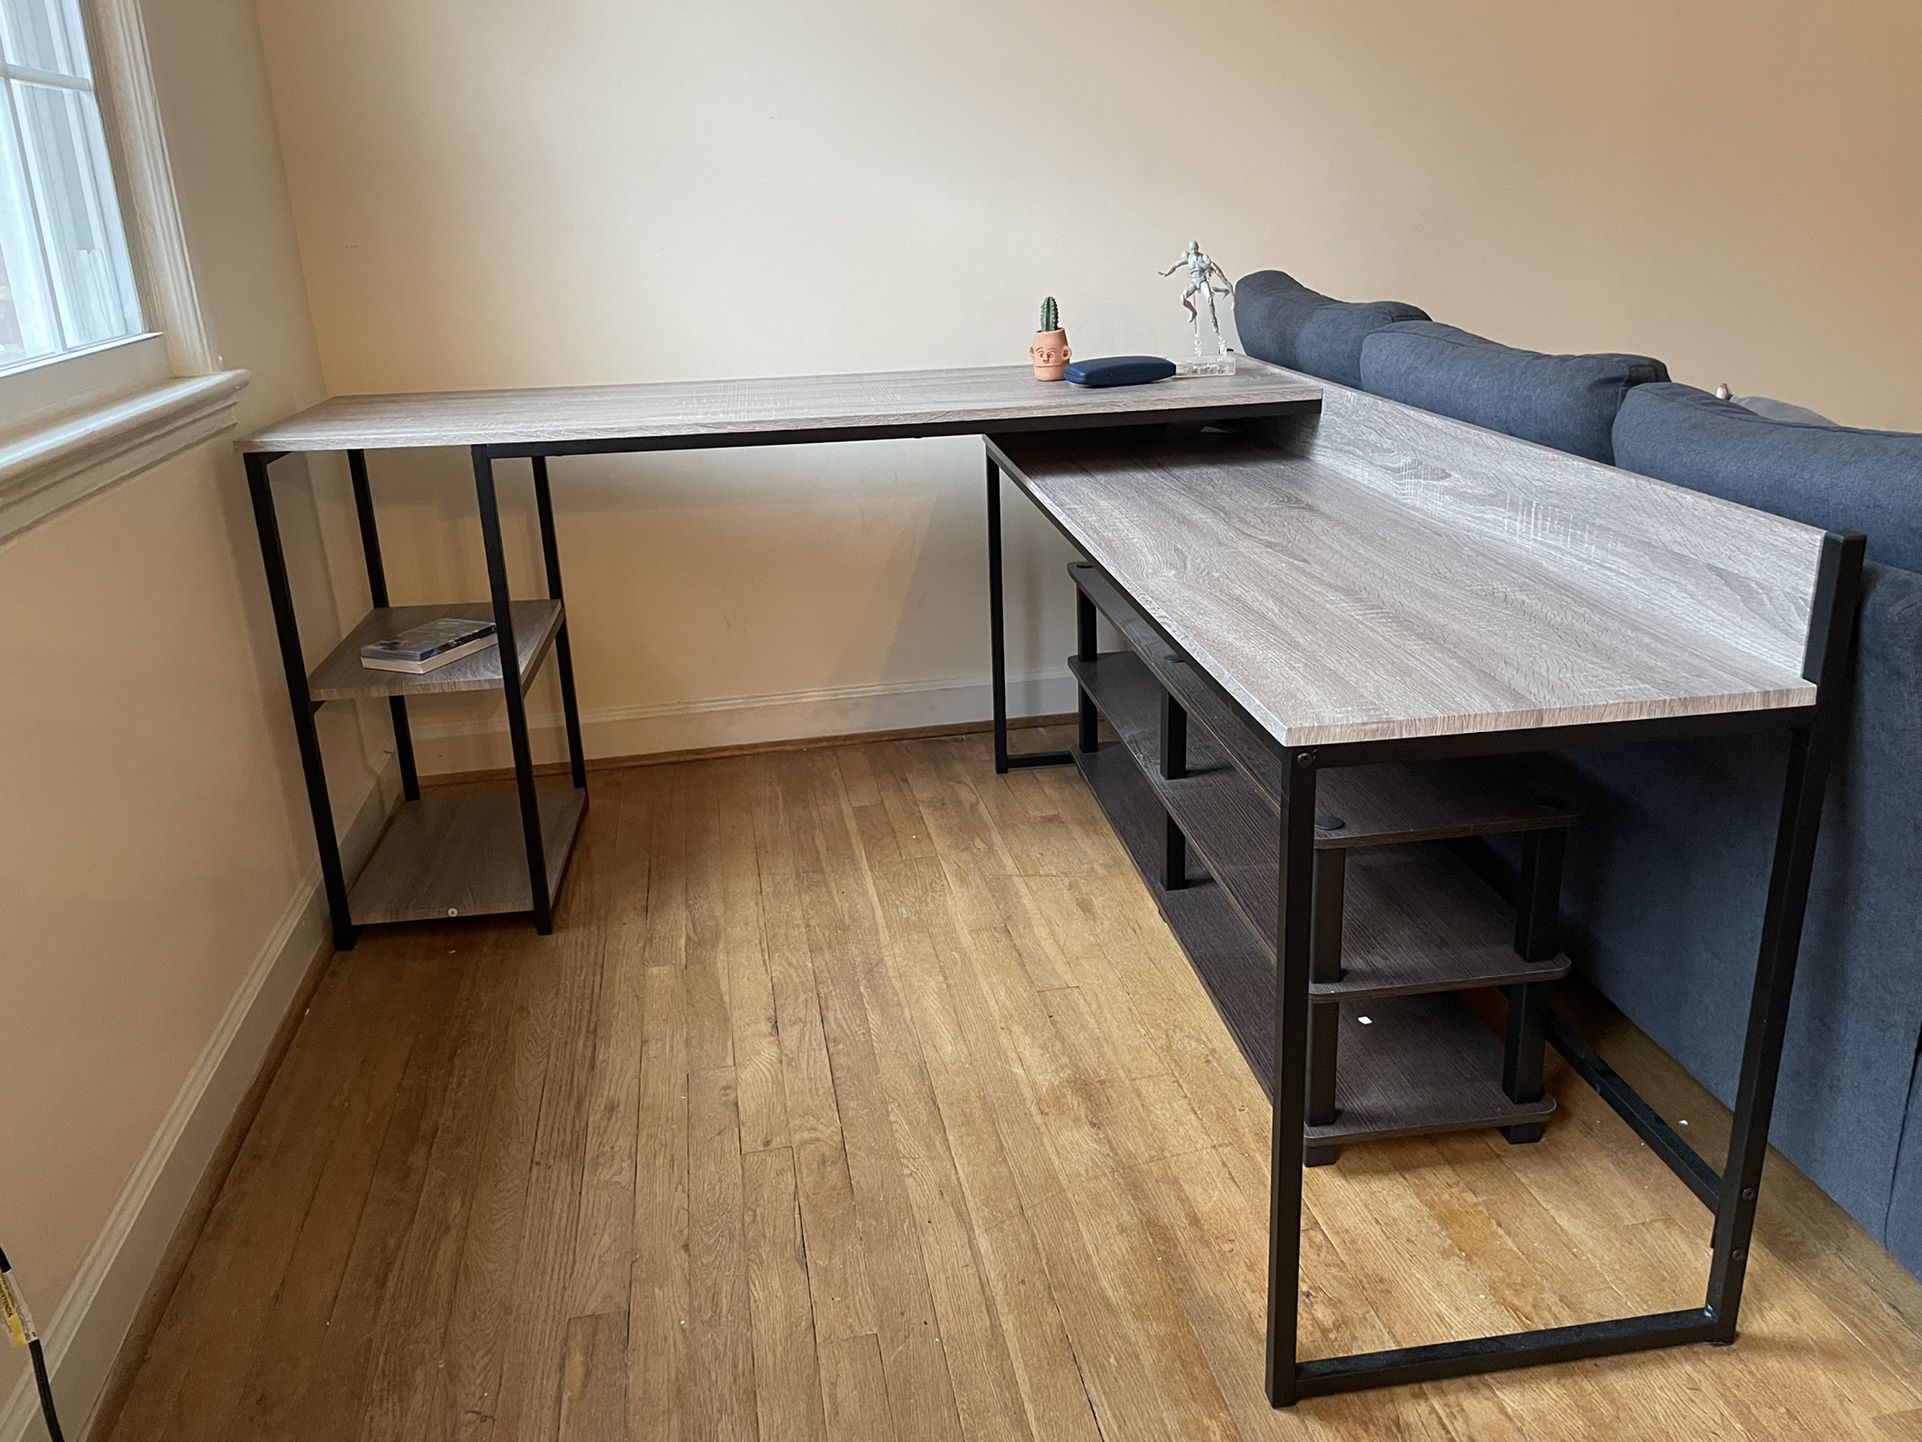 Large Desk With Shelving